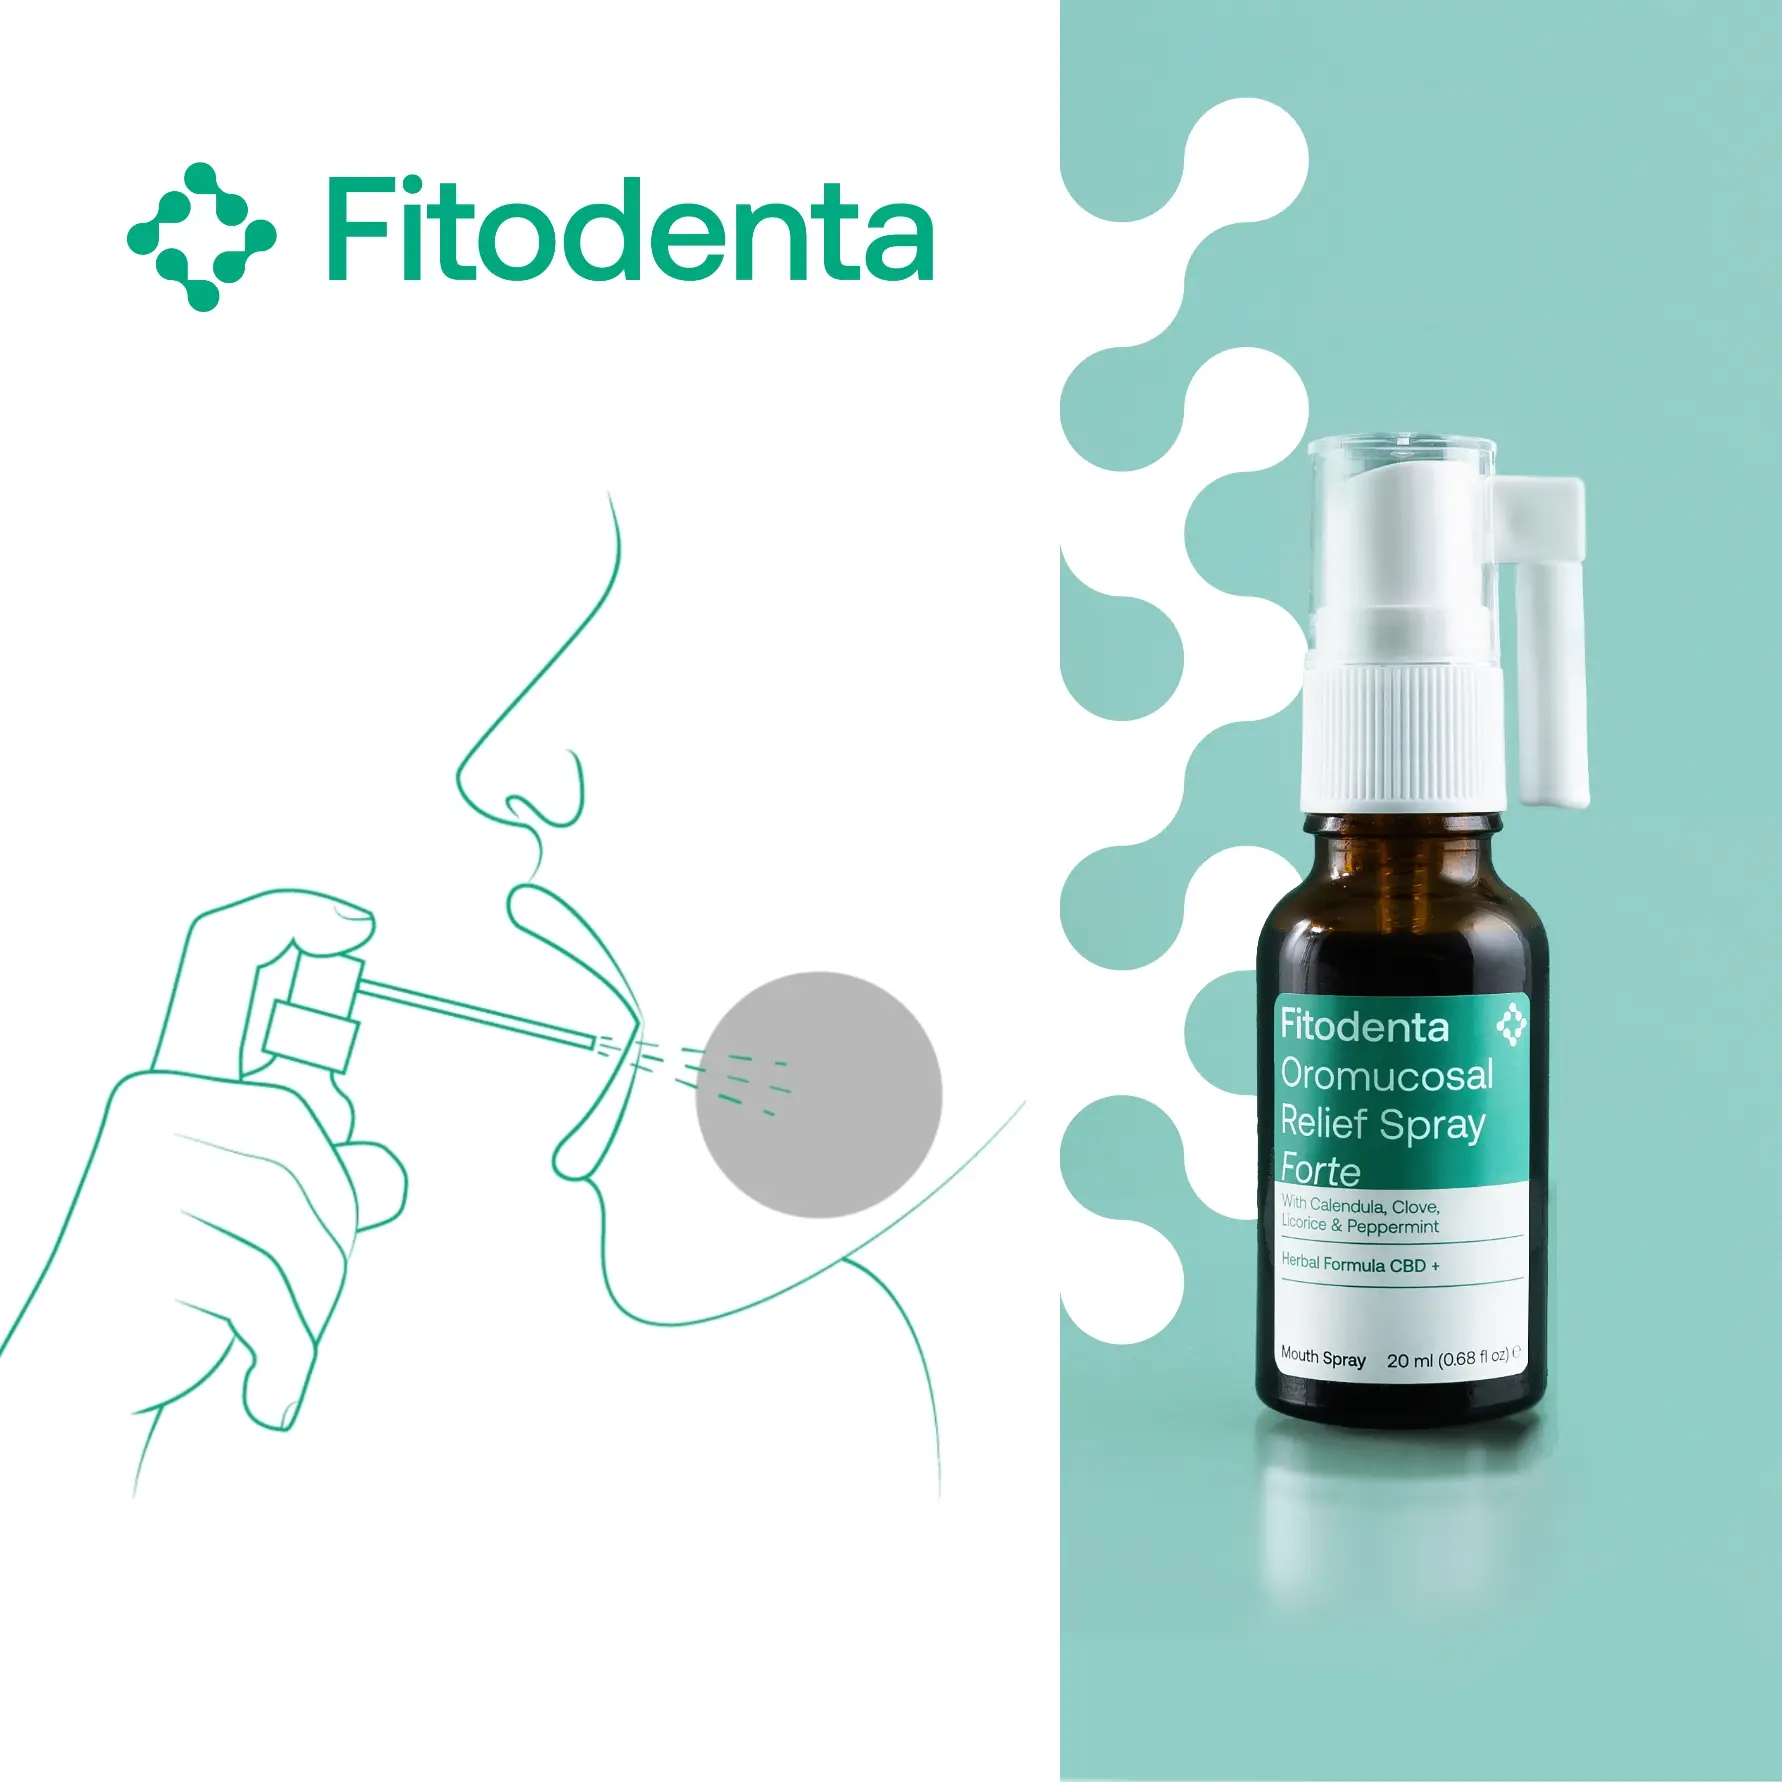 FITODENTA ANTIMICROBIAL EFFECT